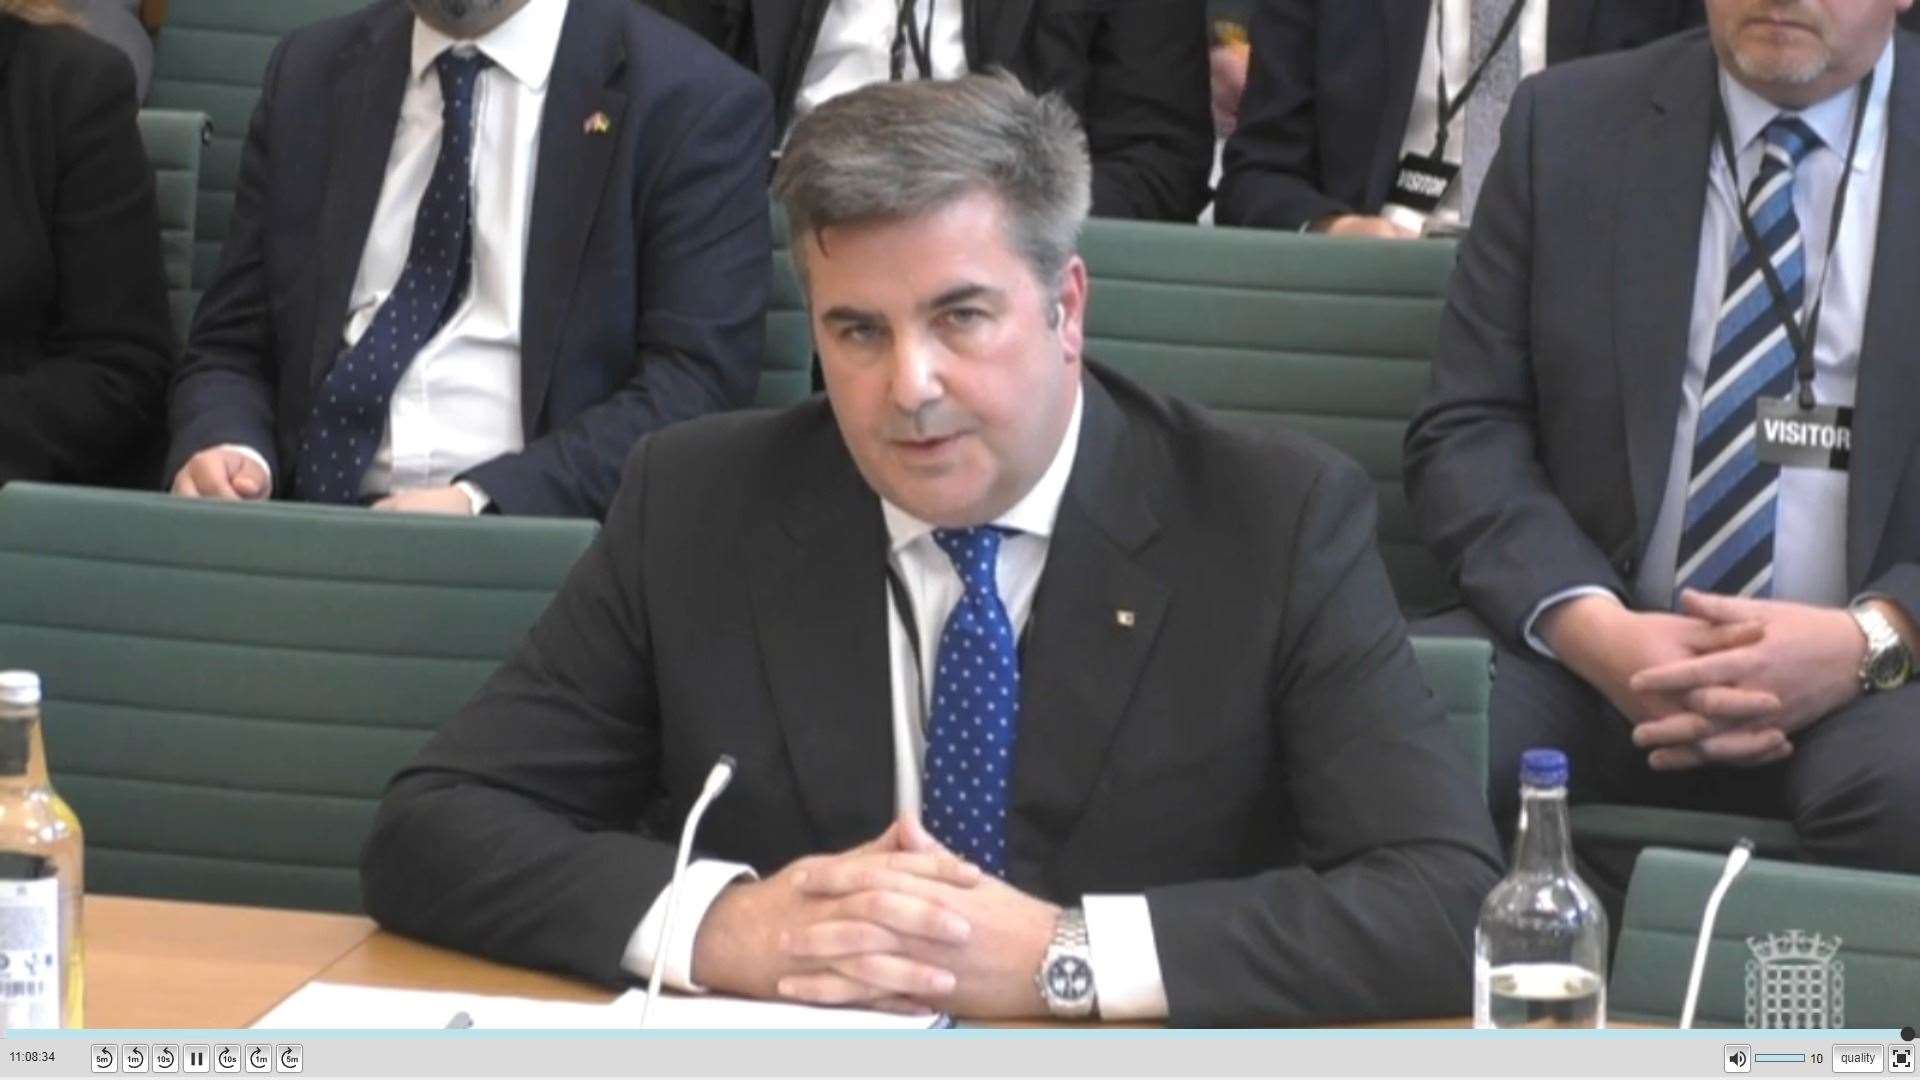 Chief executive Peter Hebblethwaite speaking to MPs on Msrch 24.